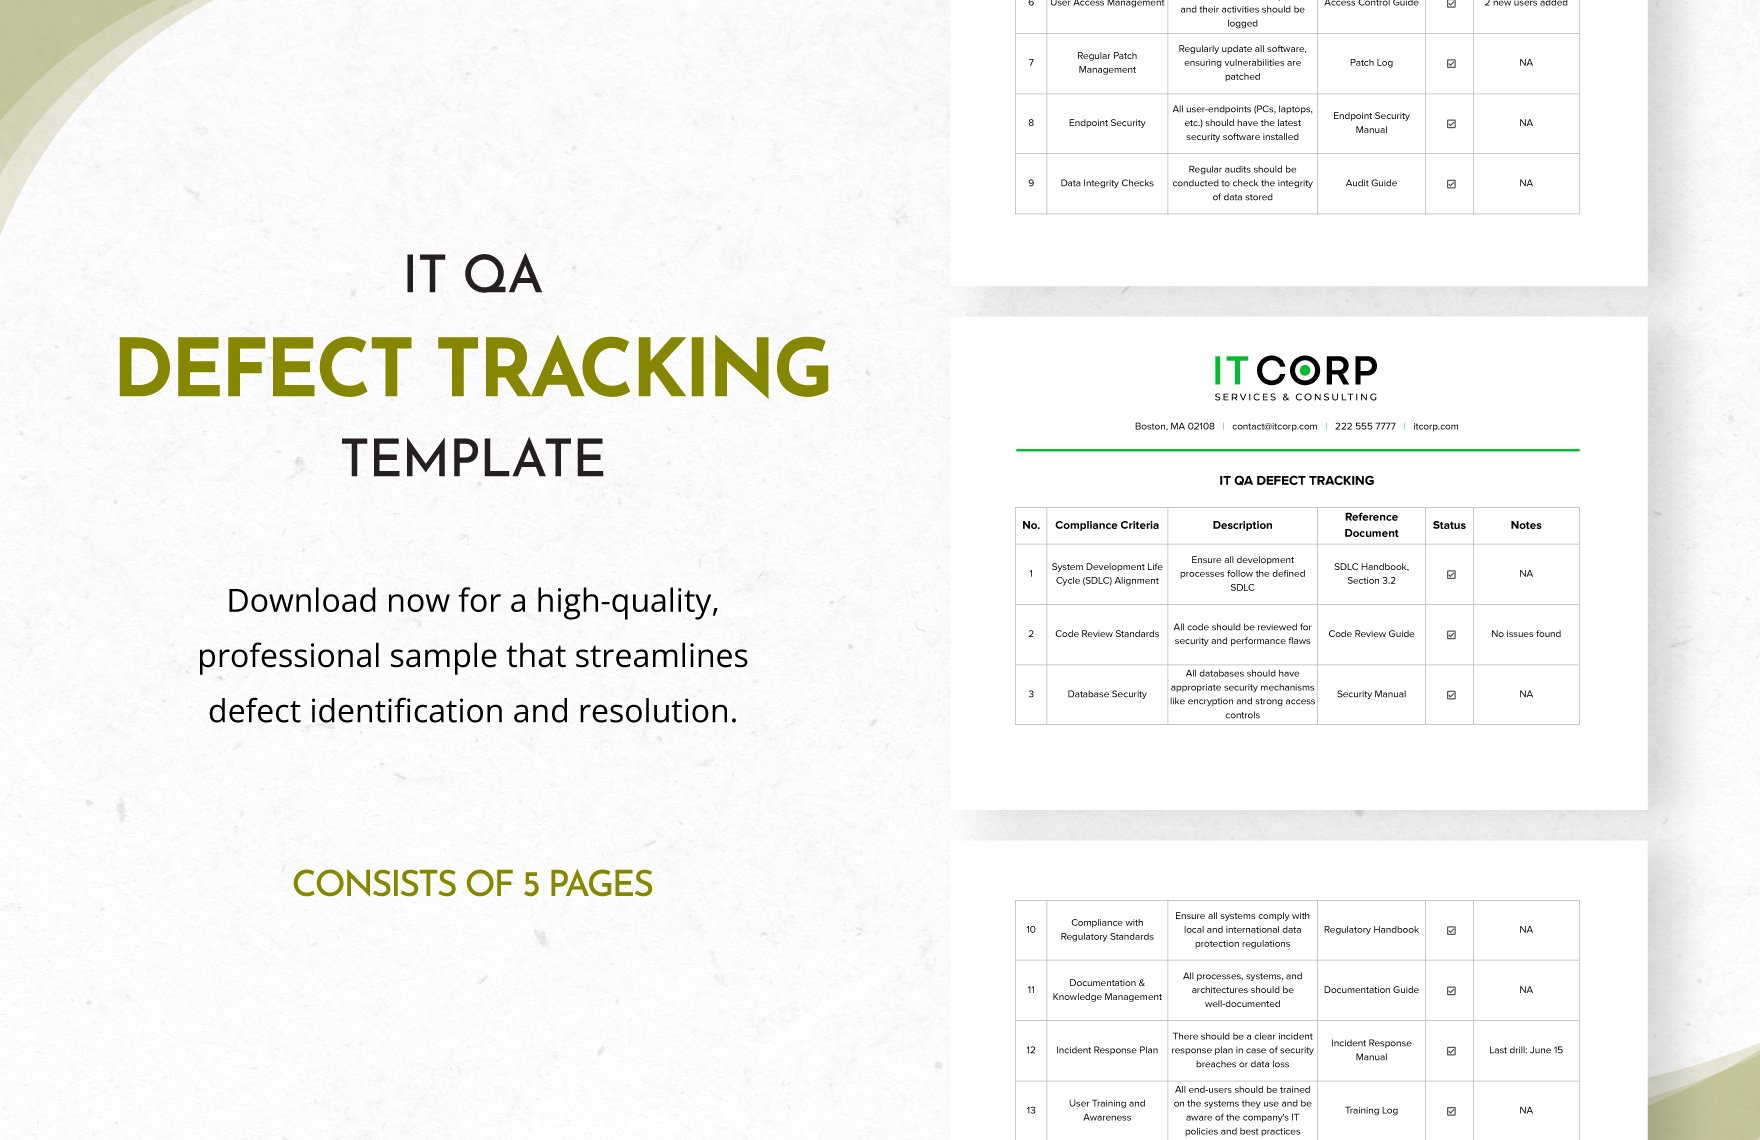 IT QA Defect Tracking Template